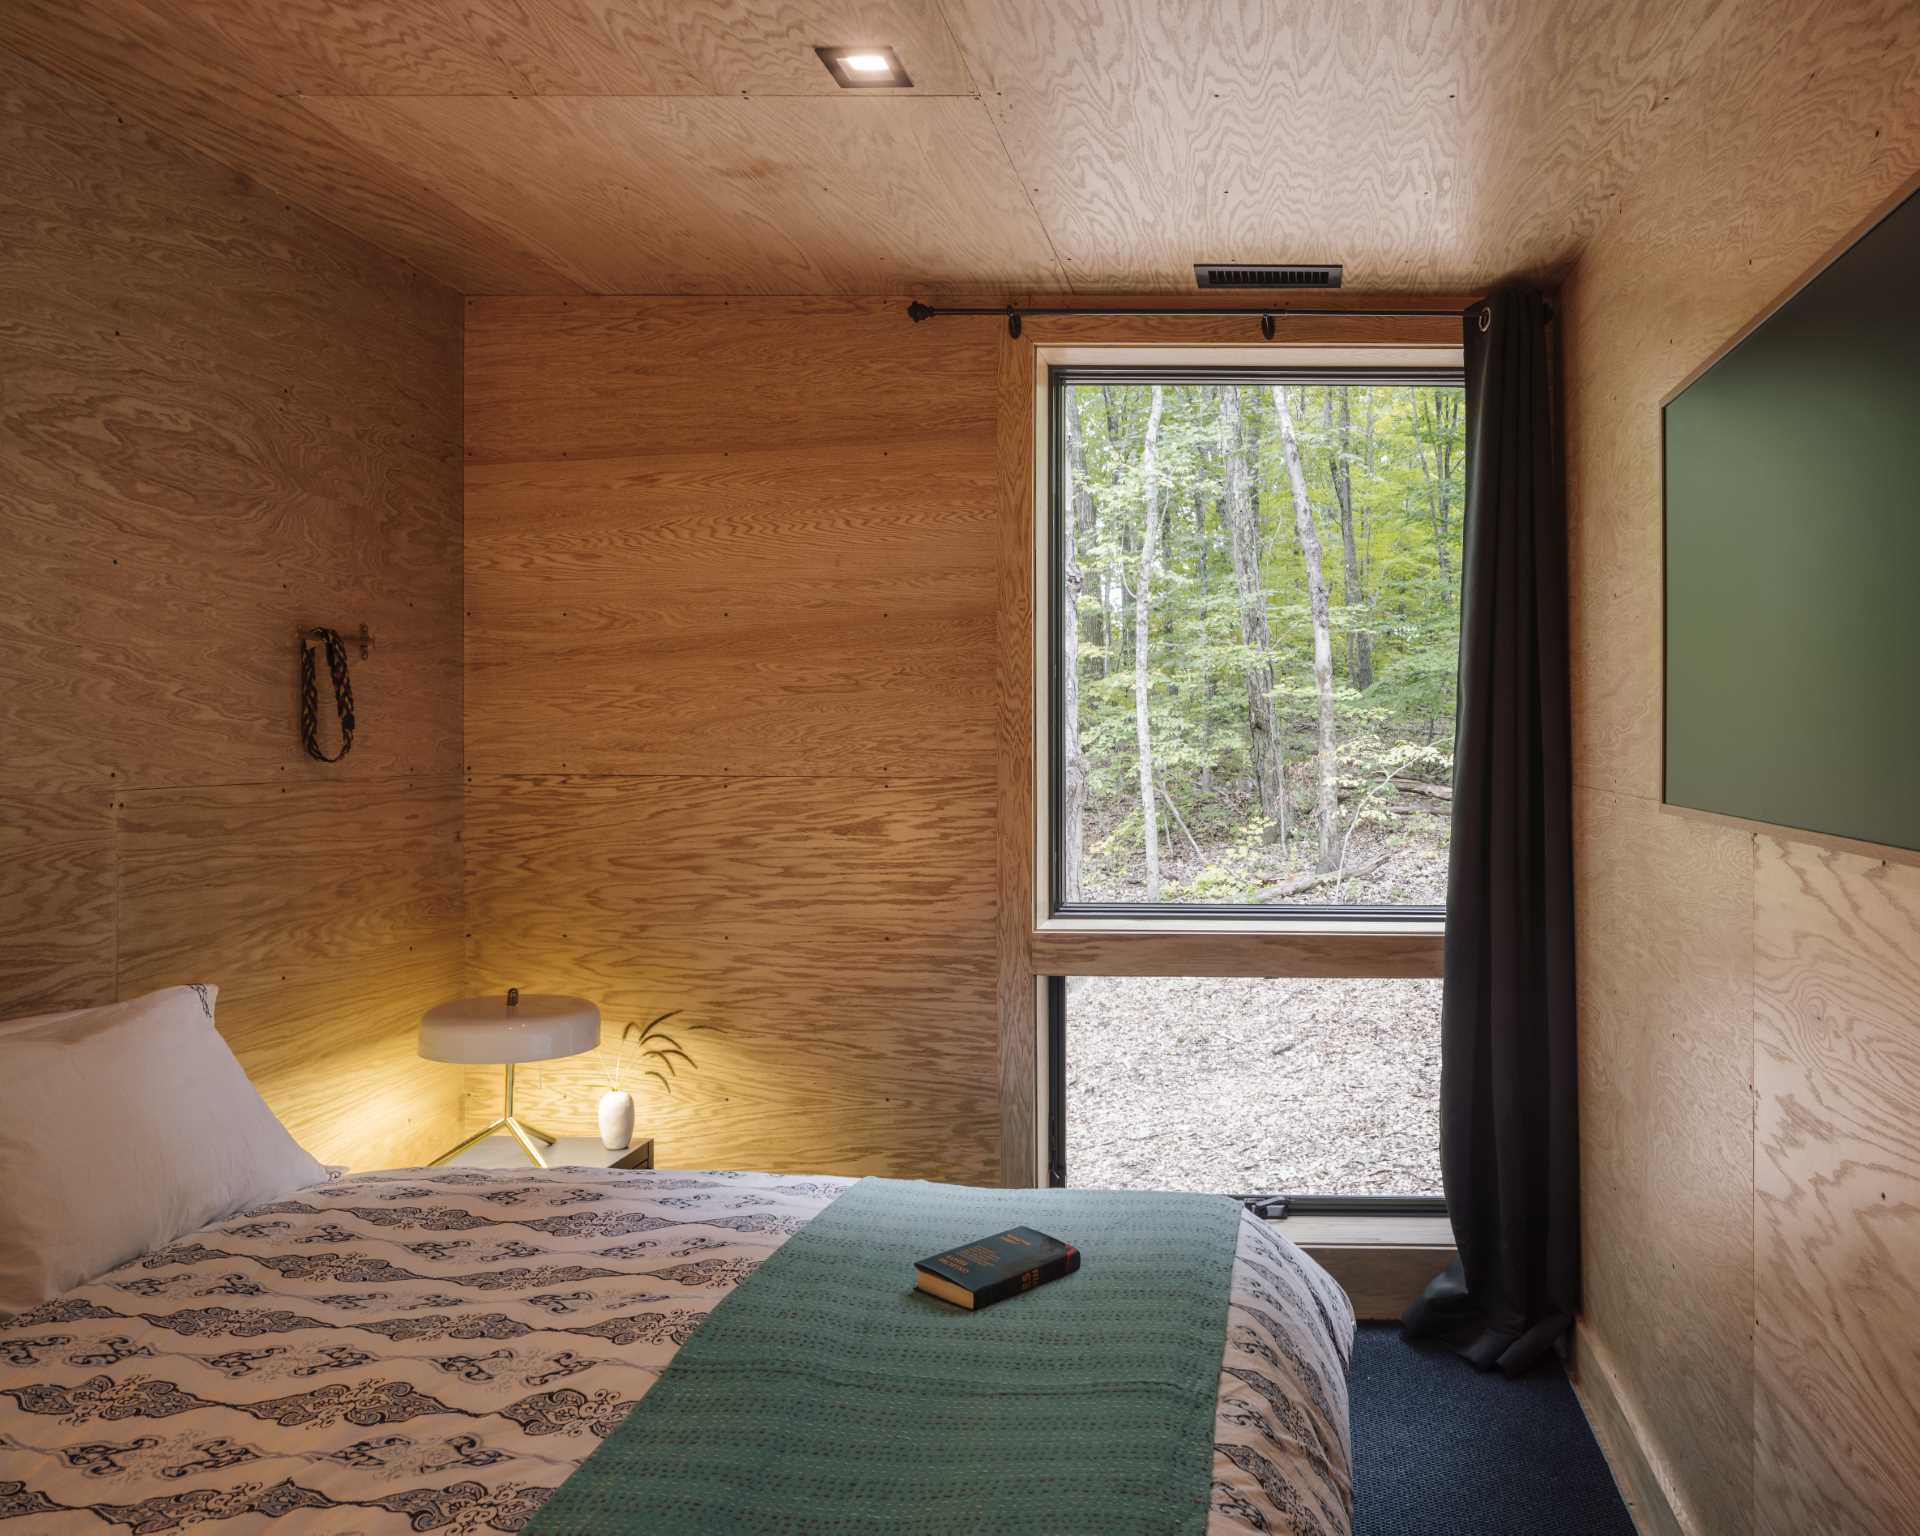 A bedroom lined with wood include a vertical window for natural light and views of the trees.